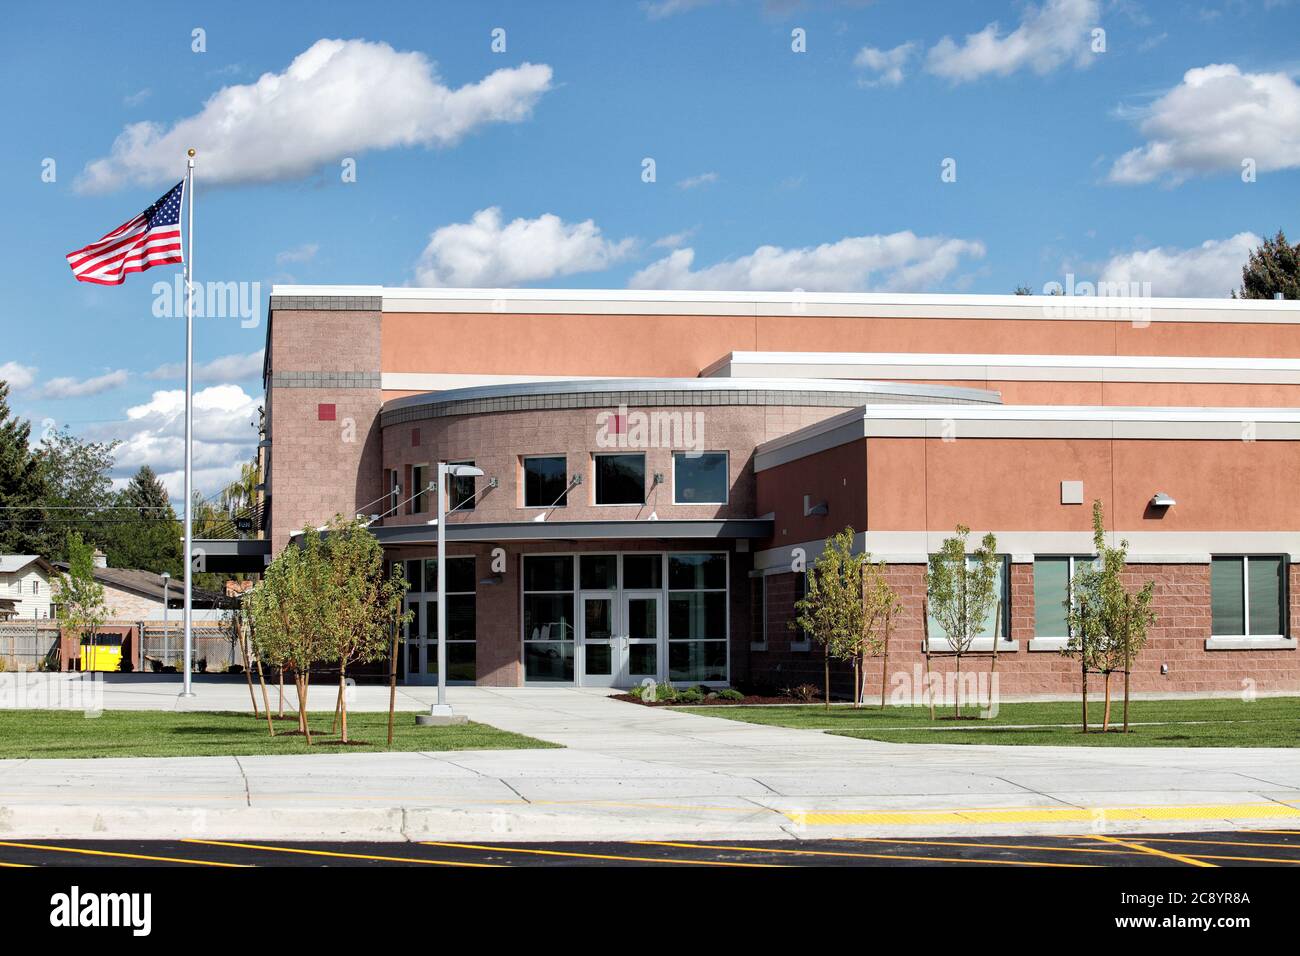 A modern elementary school built for safety and energy efficiency. Stock Photo